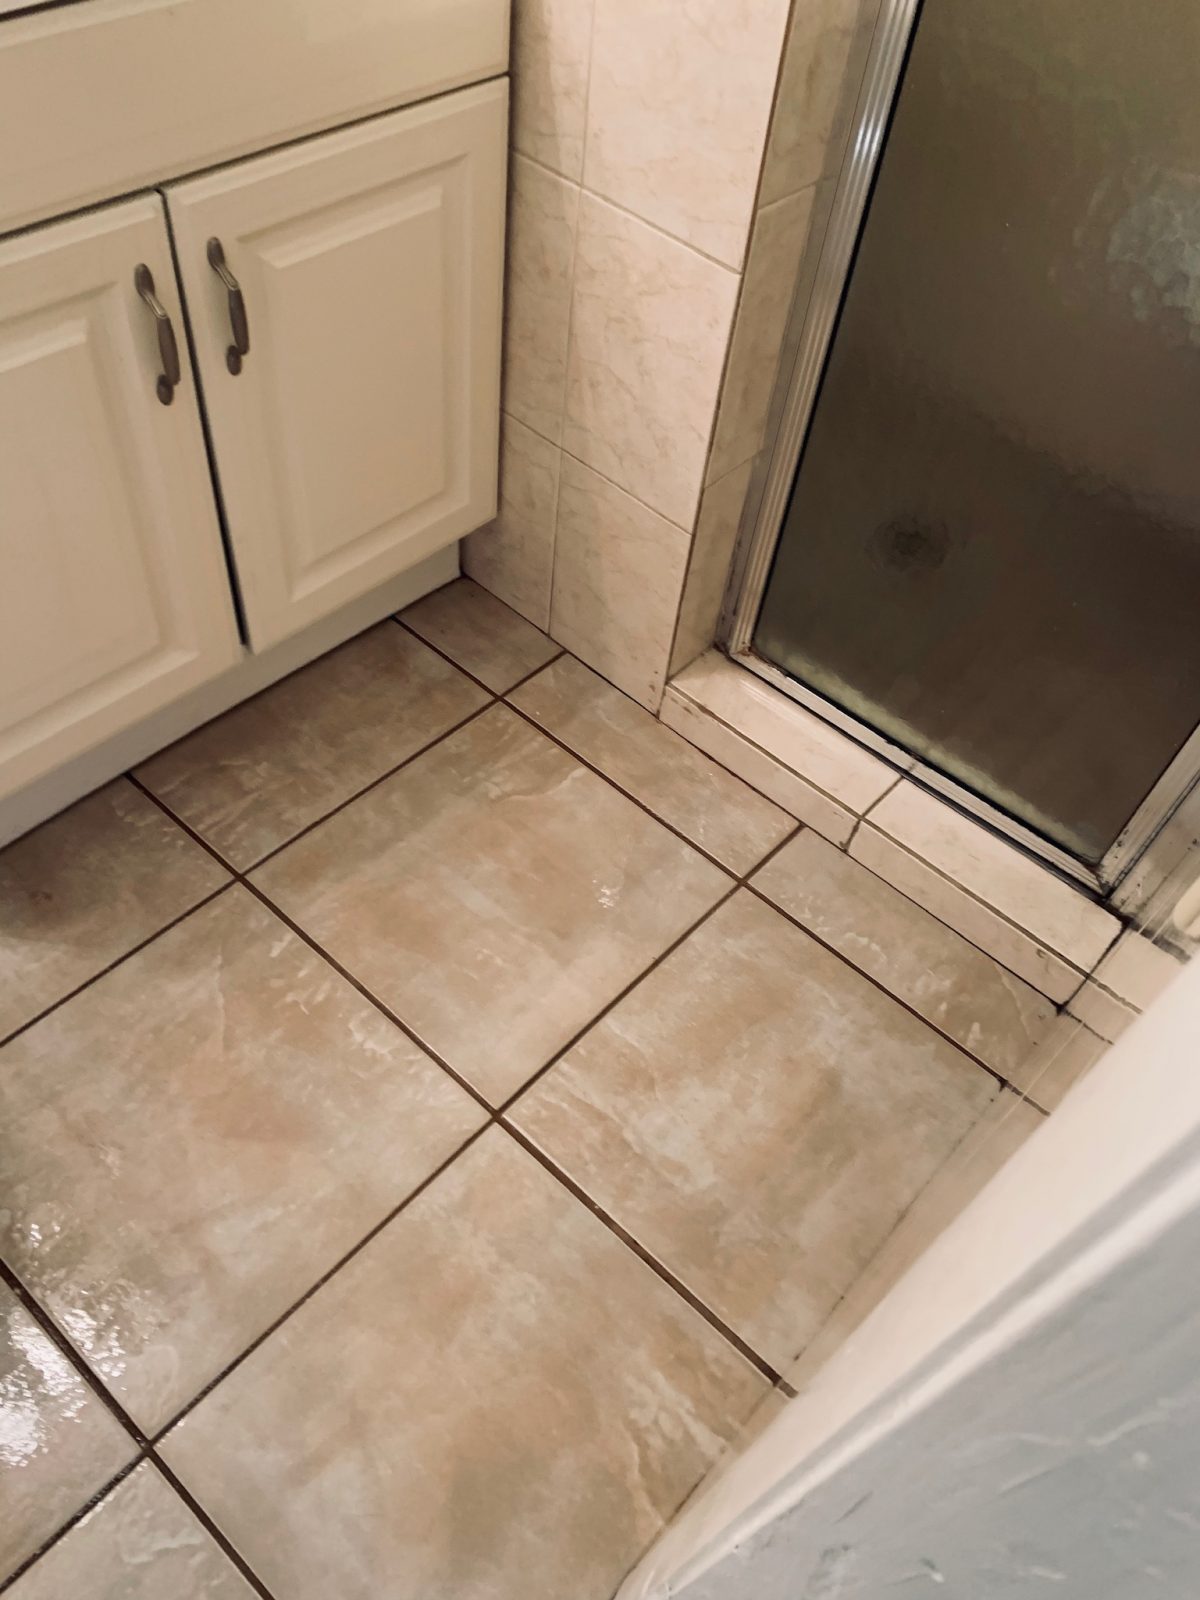 Professional Tile and Grout Cleaning Image Palm Harbor Sample 5